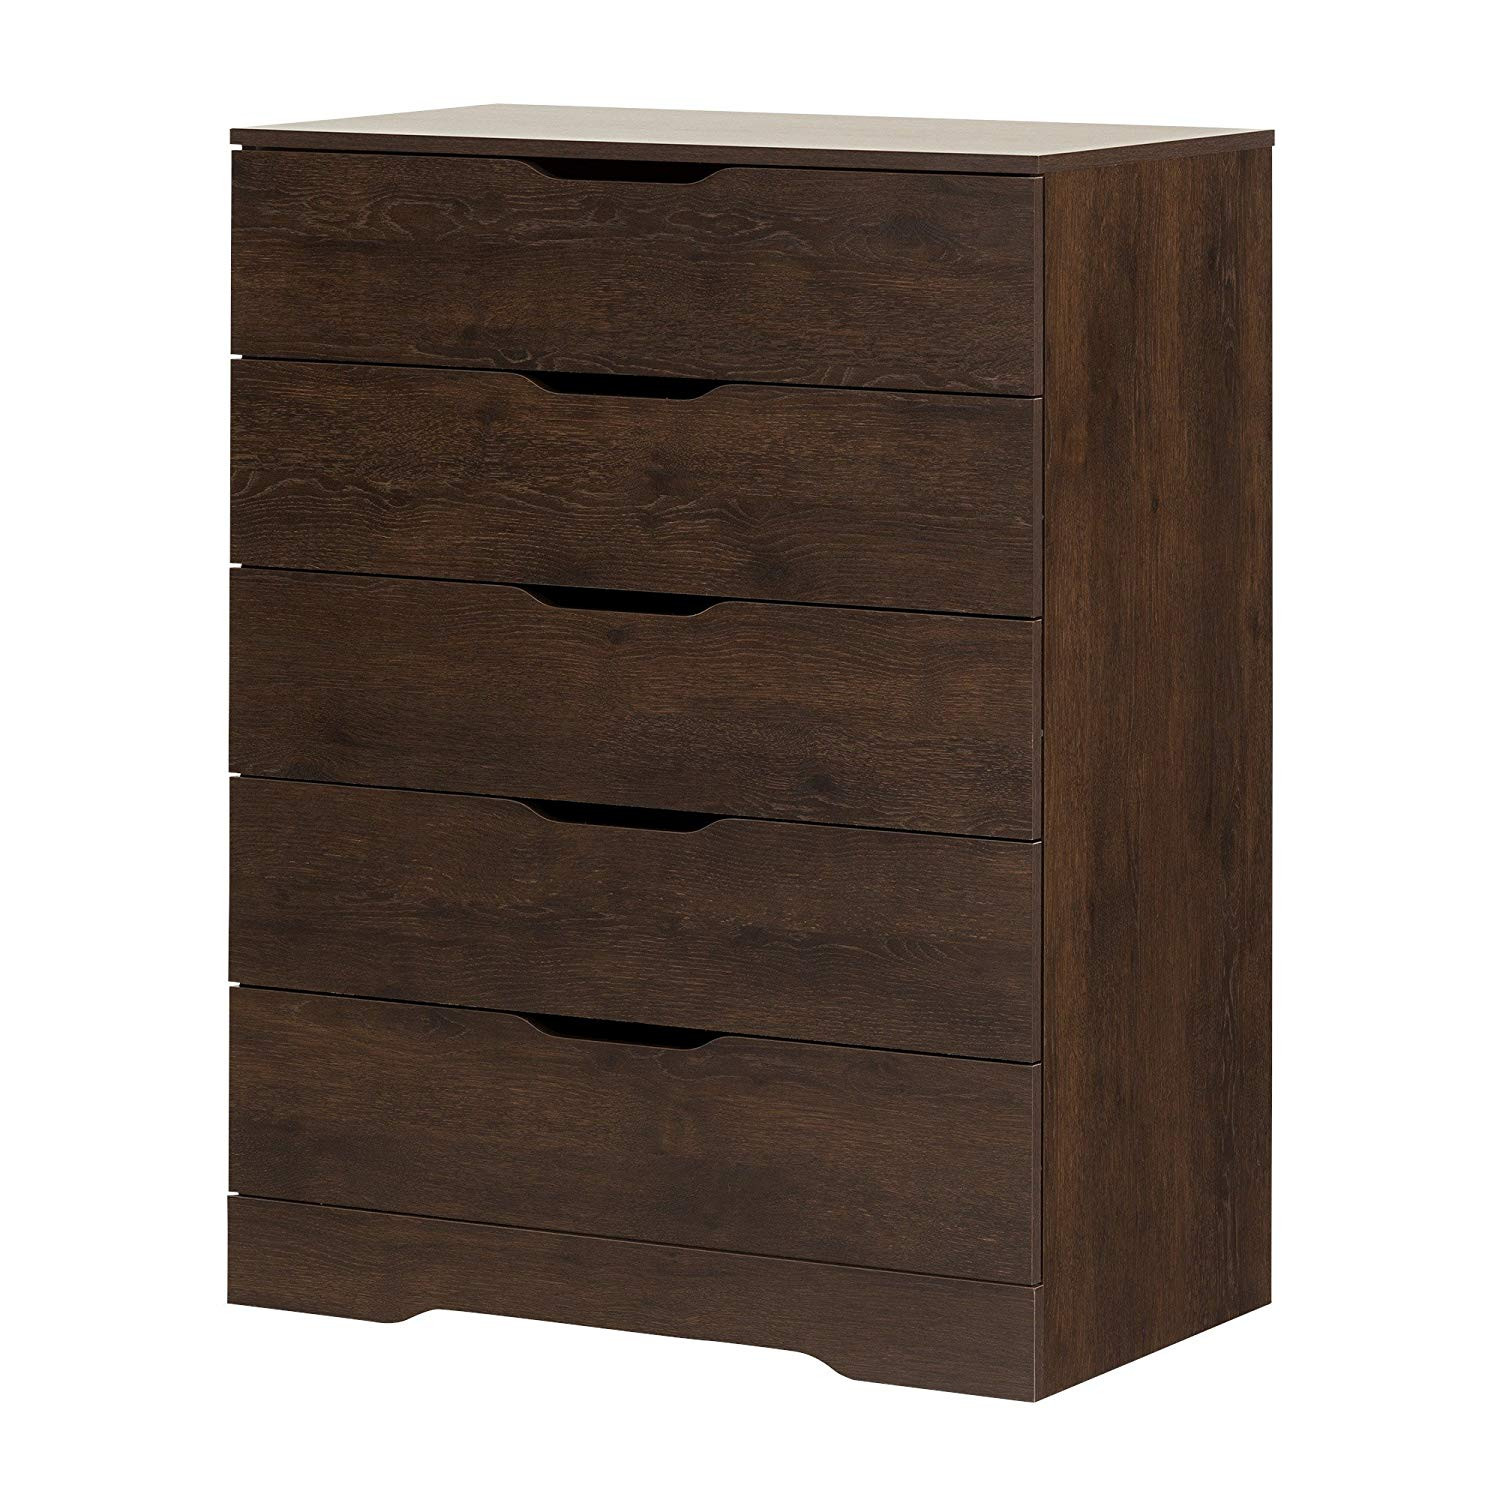 chinese wooden stands for vases of amazon com south shore 11162 holland 5 drawer chest brown oak for amazon com south shore 11162 holland 5 drawer chest brown oak kitchen dining